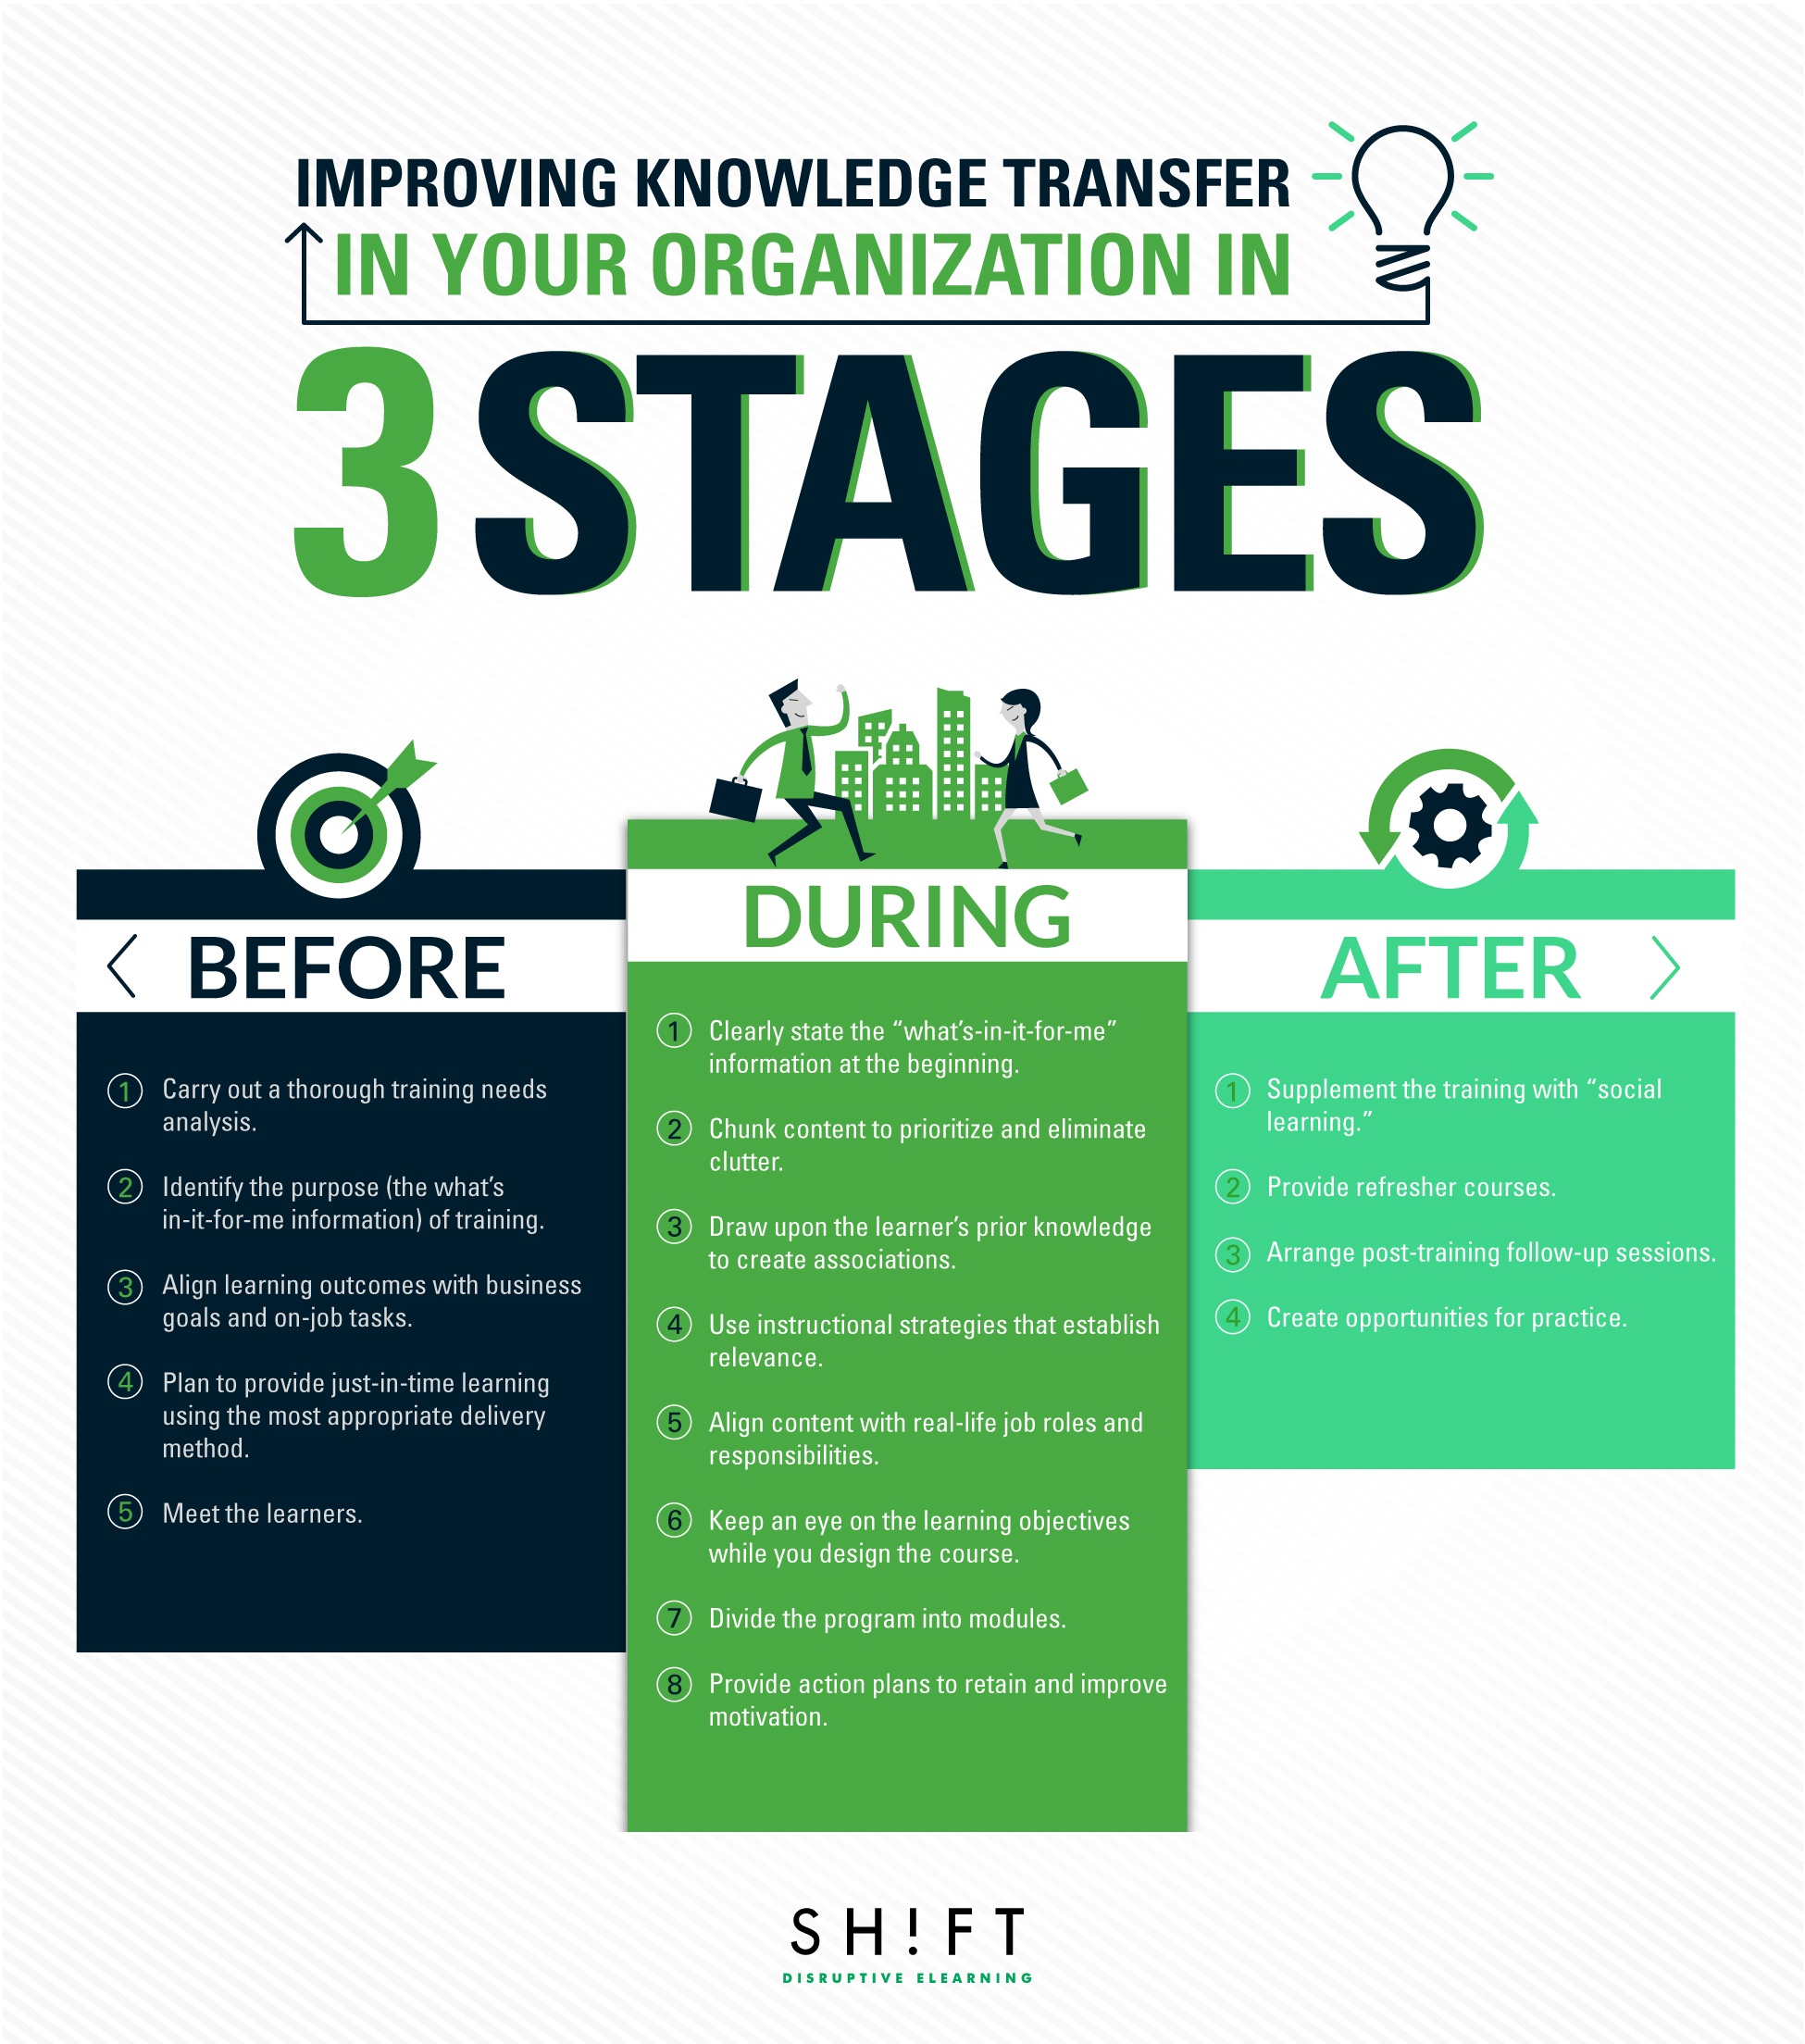 Improving Knowledge Transfer in Your Organization - Shift E-learning